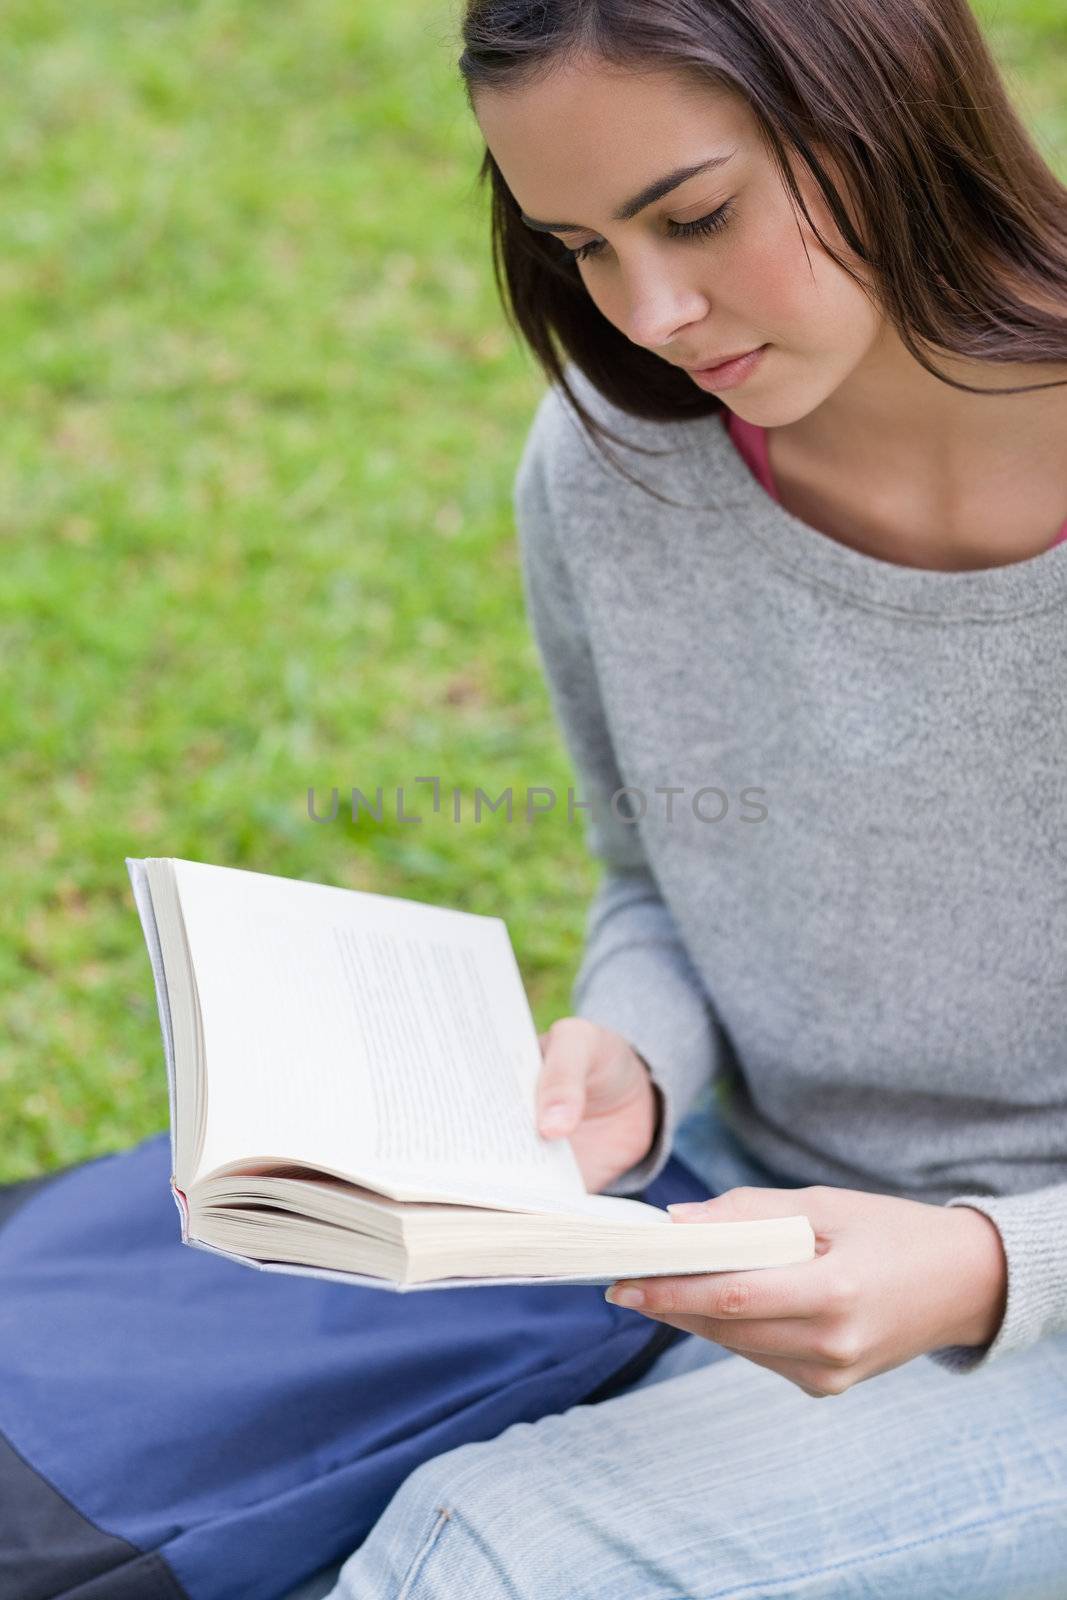 Serious young woman sitting on the grass in a public garden while reading a book